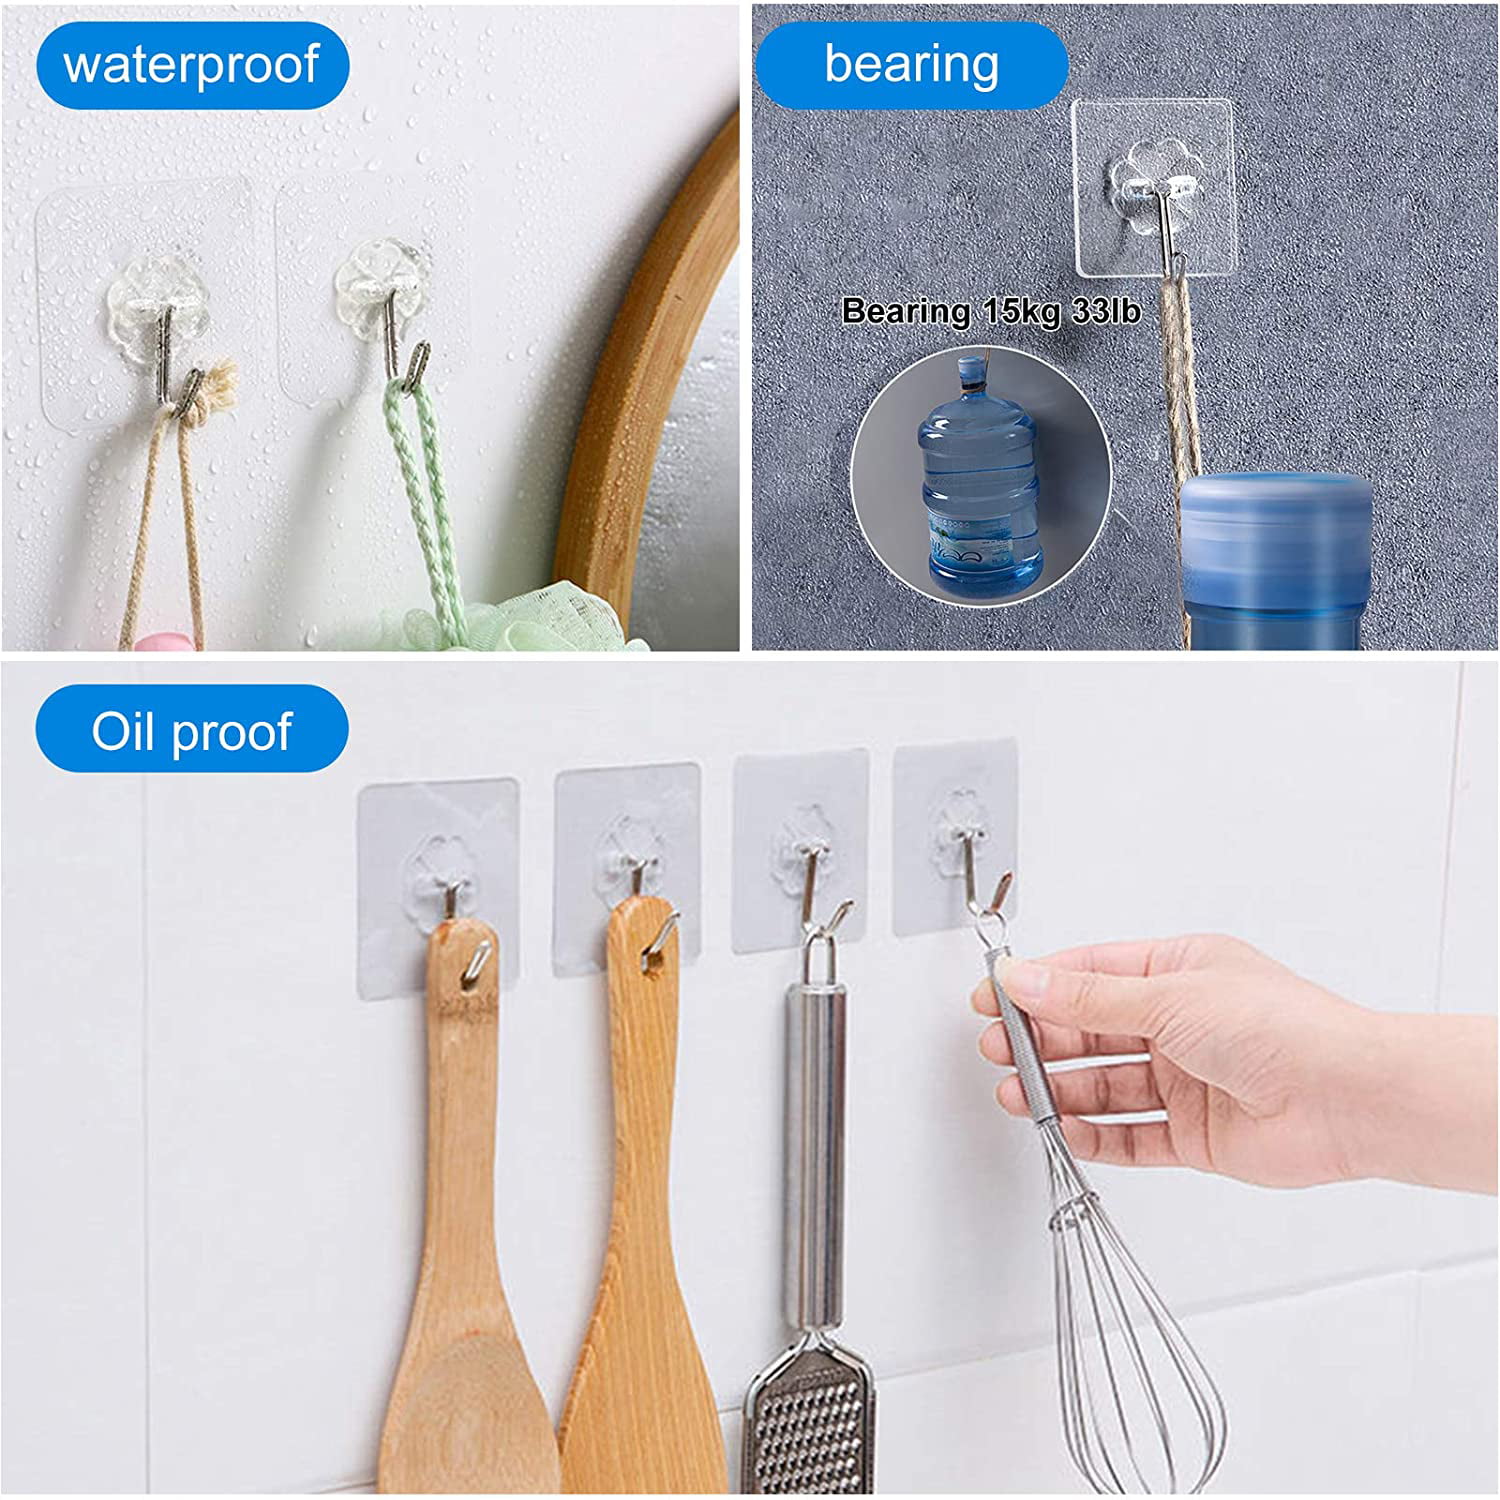 Damaie Adhesive Hooks Heavy Duty Wall Hangers Without Nails 22lbs(Max) 180 Degree Rotating Anti-Skid Reusable Traceless Ceiling Hooks For Hanging Bath